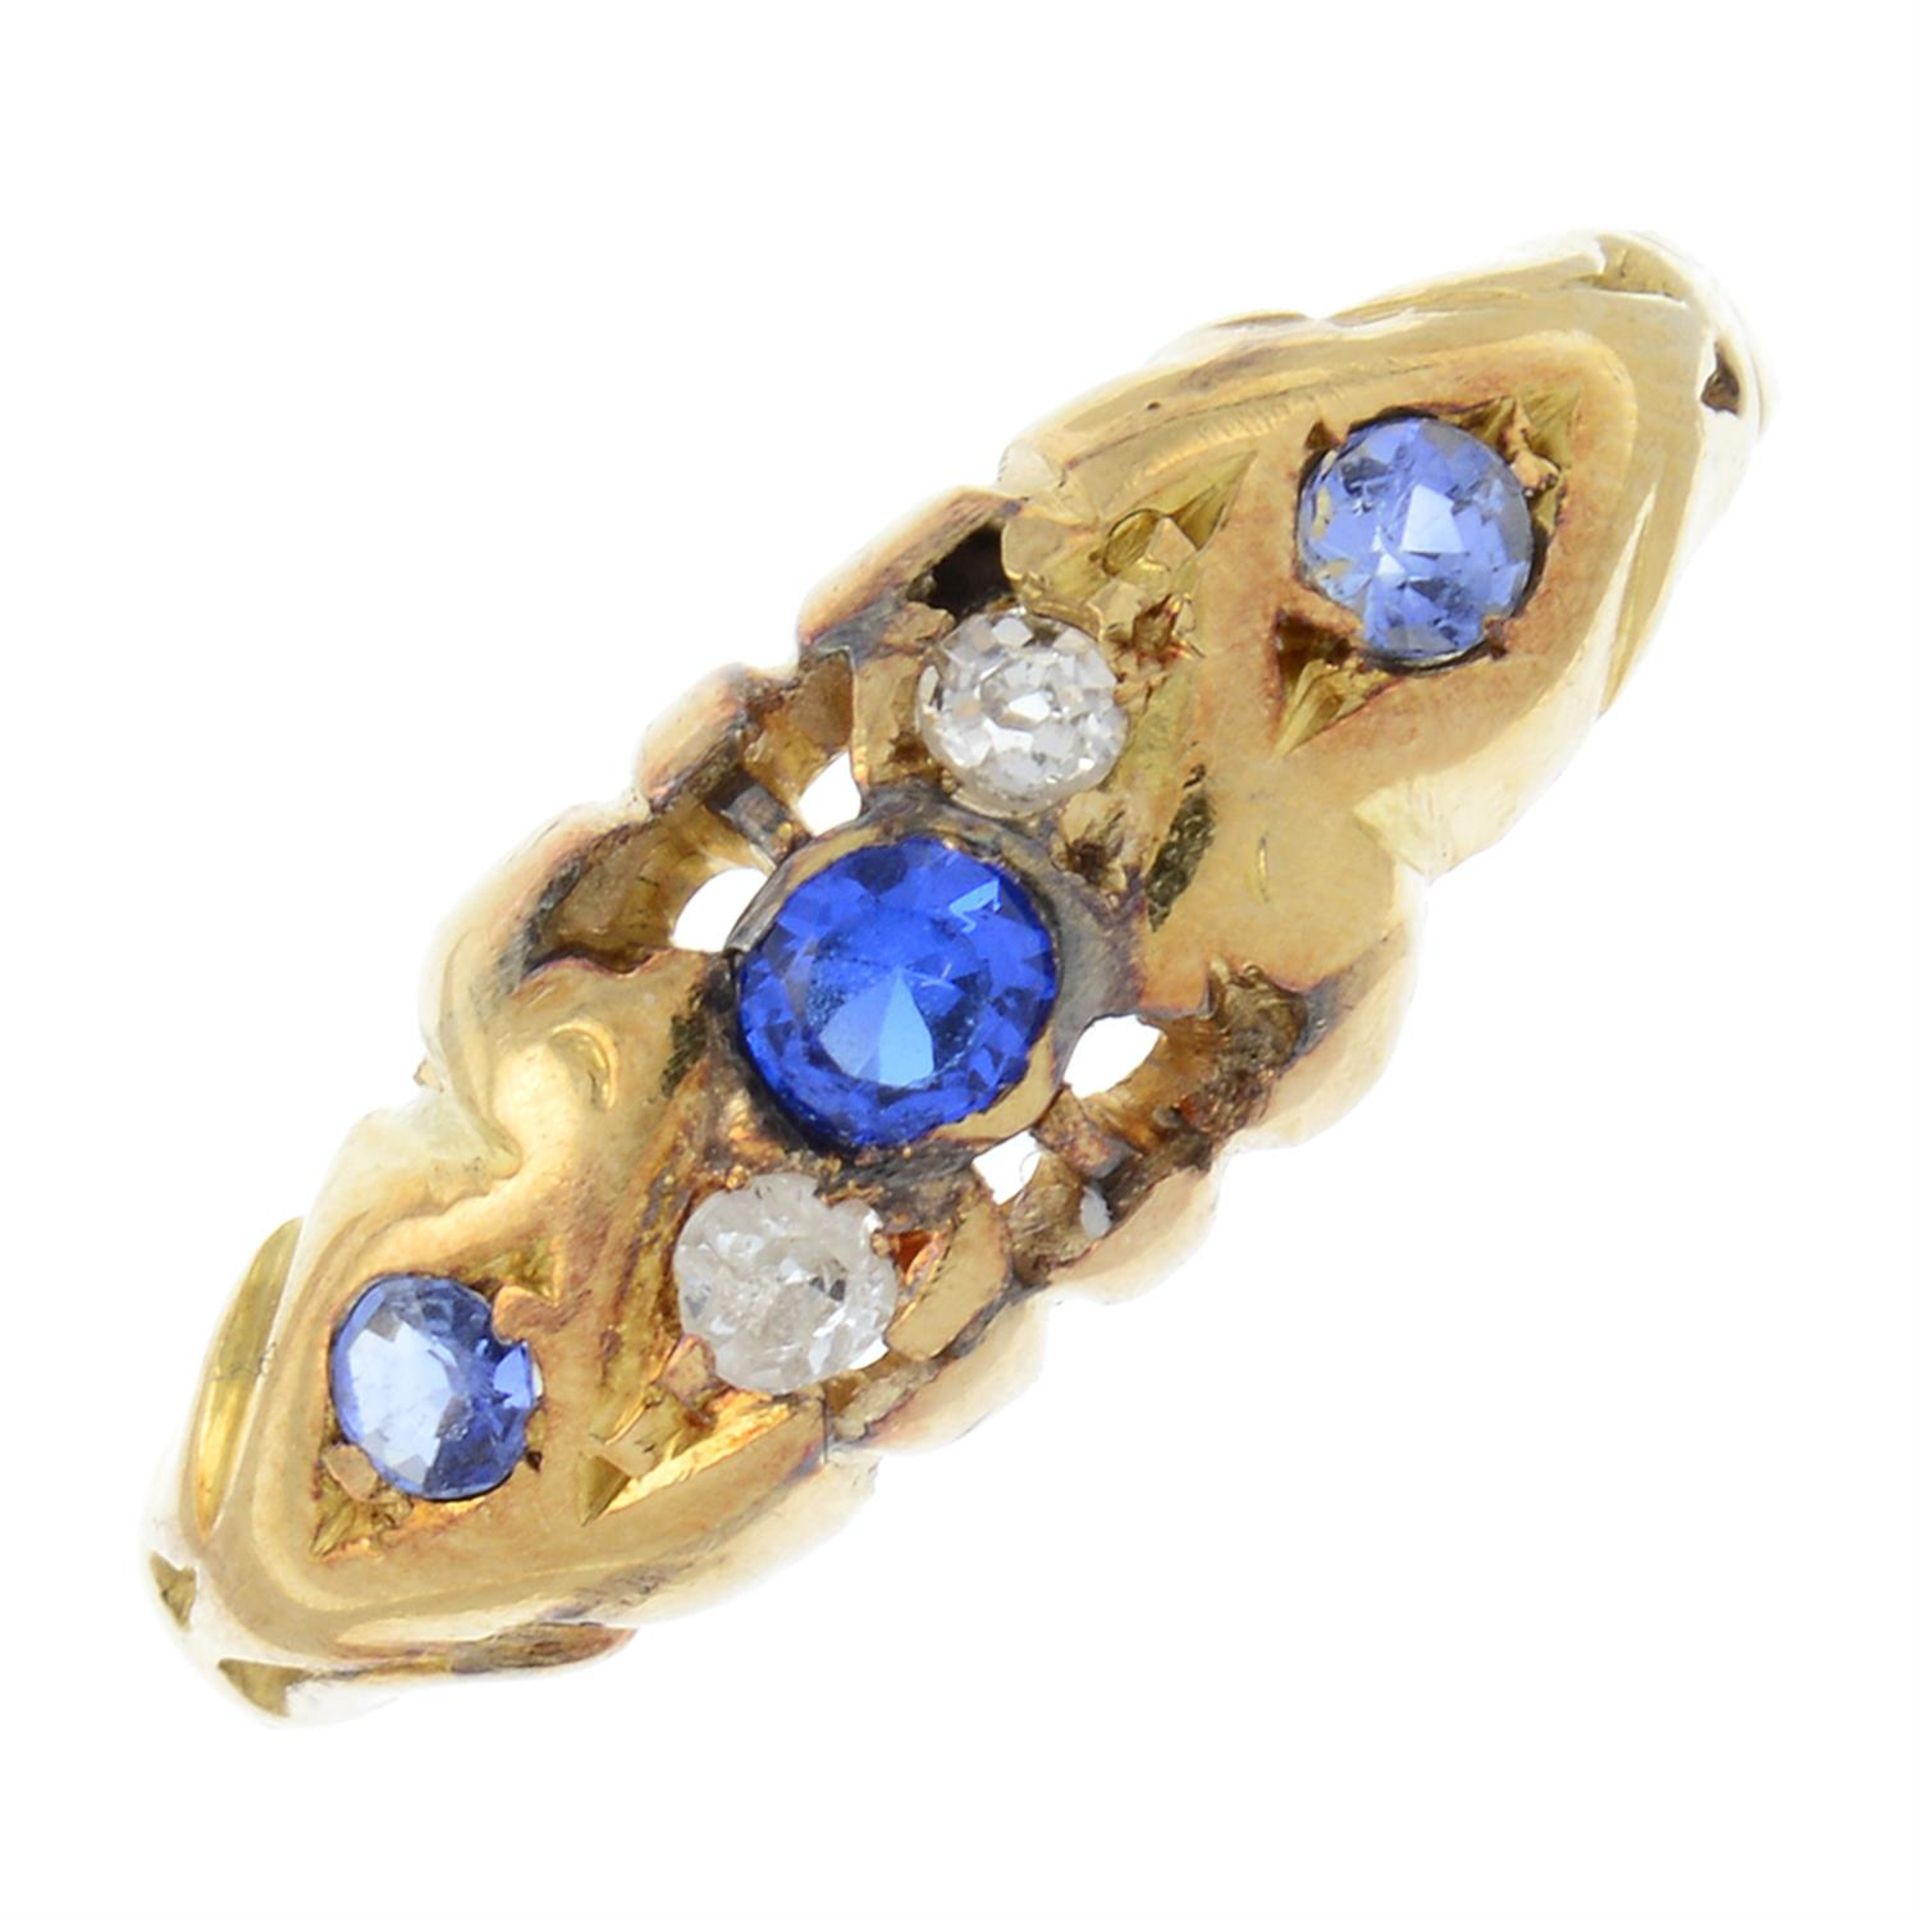 An early 20th century 18ct gold synthetic spinel, sapphire and diamond ring.